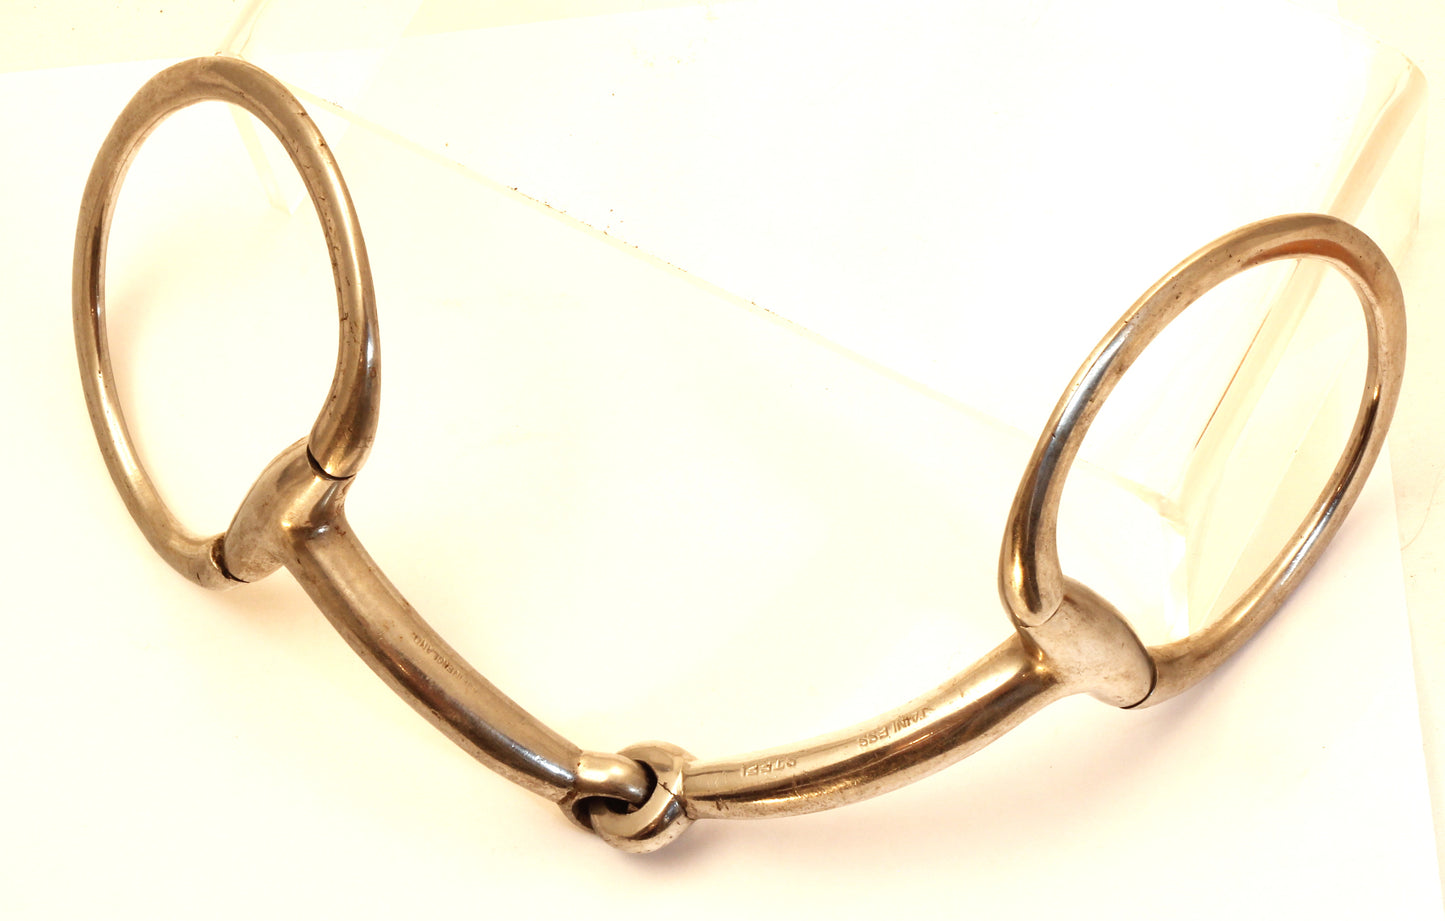 A Stainless Steel Jointed Eggbutt Snaffle